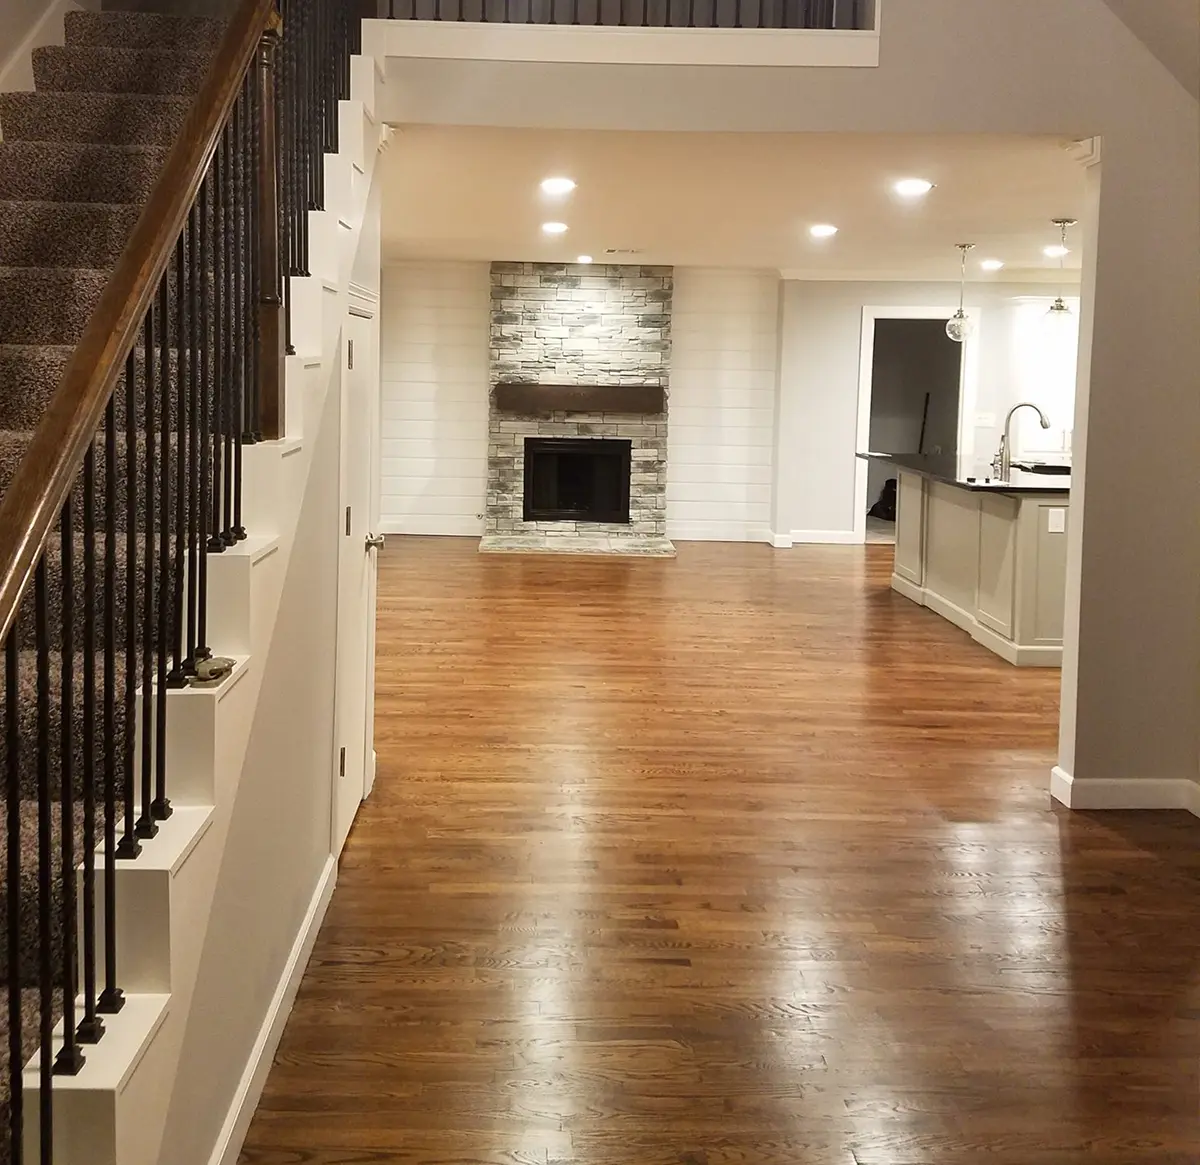 A basement with a fireplace, a kitchenette, and hardwood floors